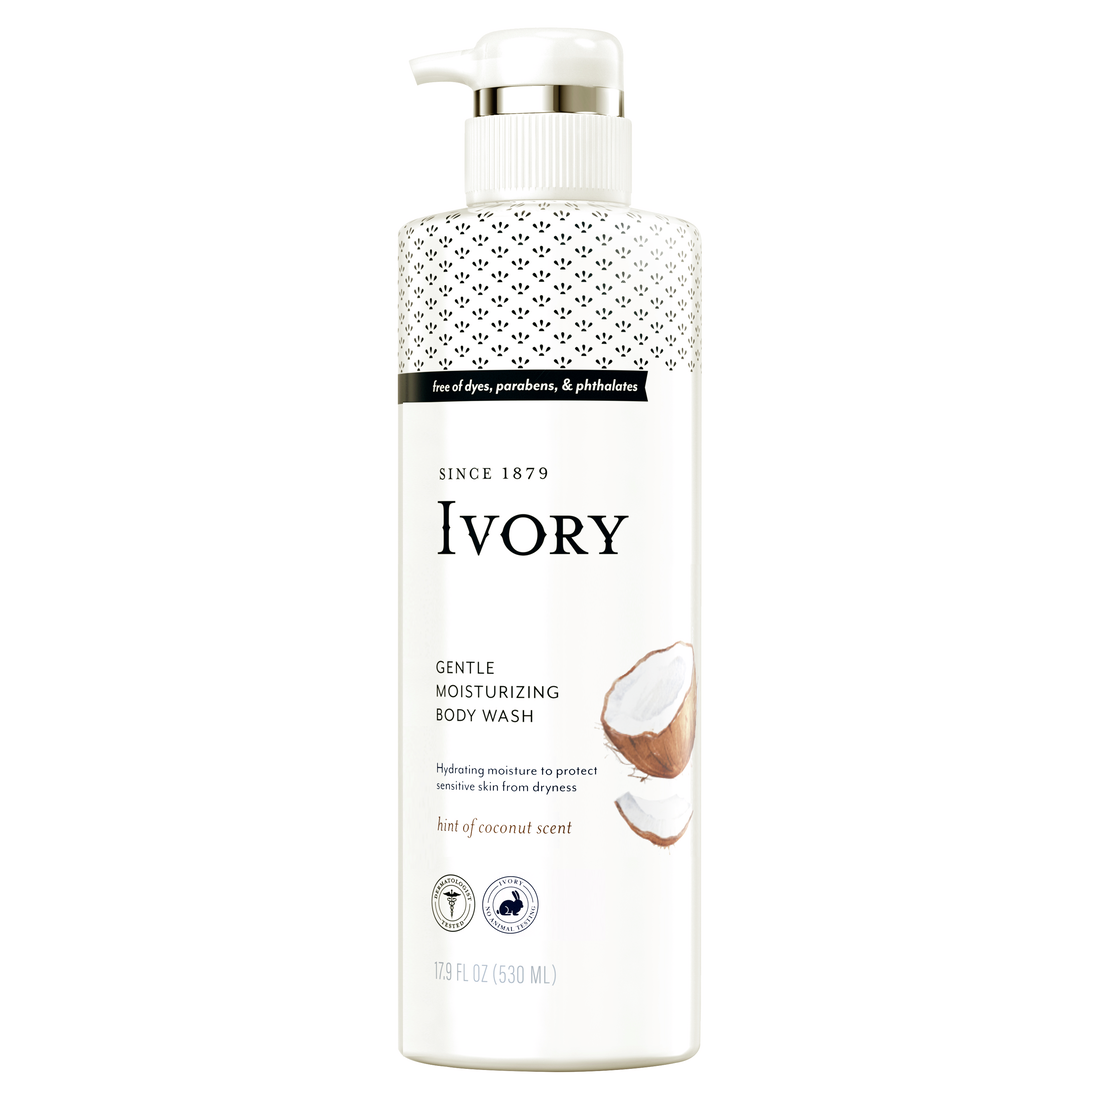 Ivory Gentle Moisturizing Body Wash for Dry, Sensitive Skin, Hint of Coconut Scent - 17.9oz/4pk